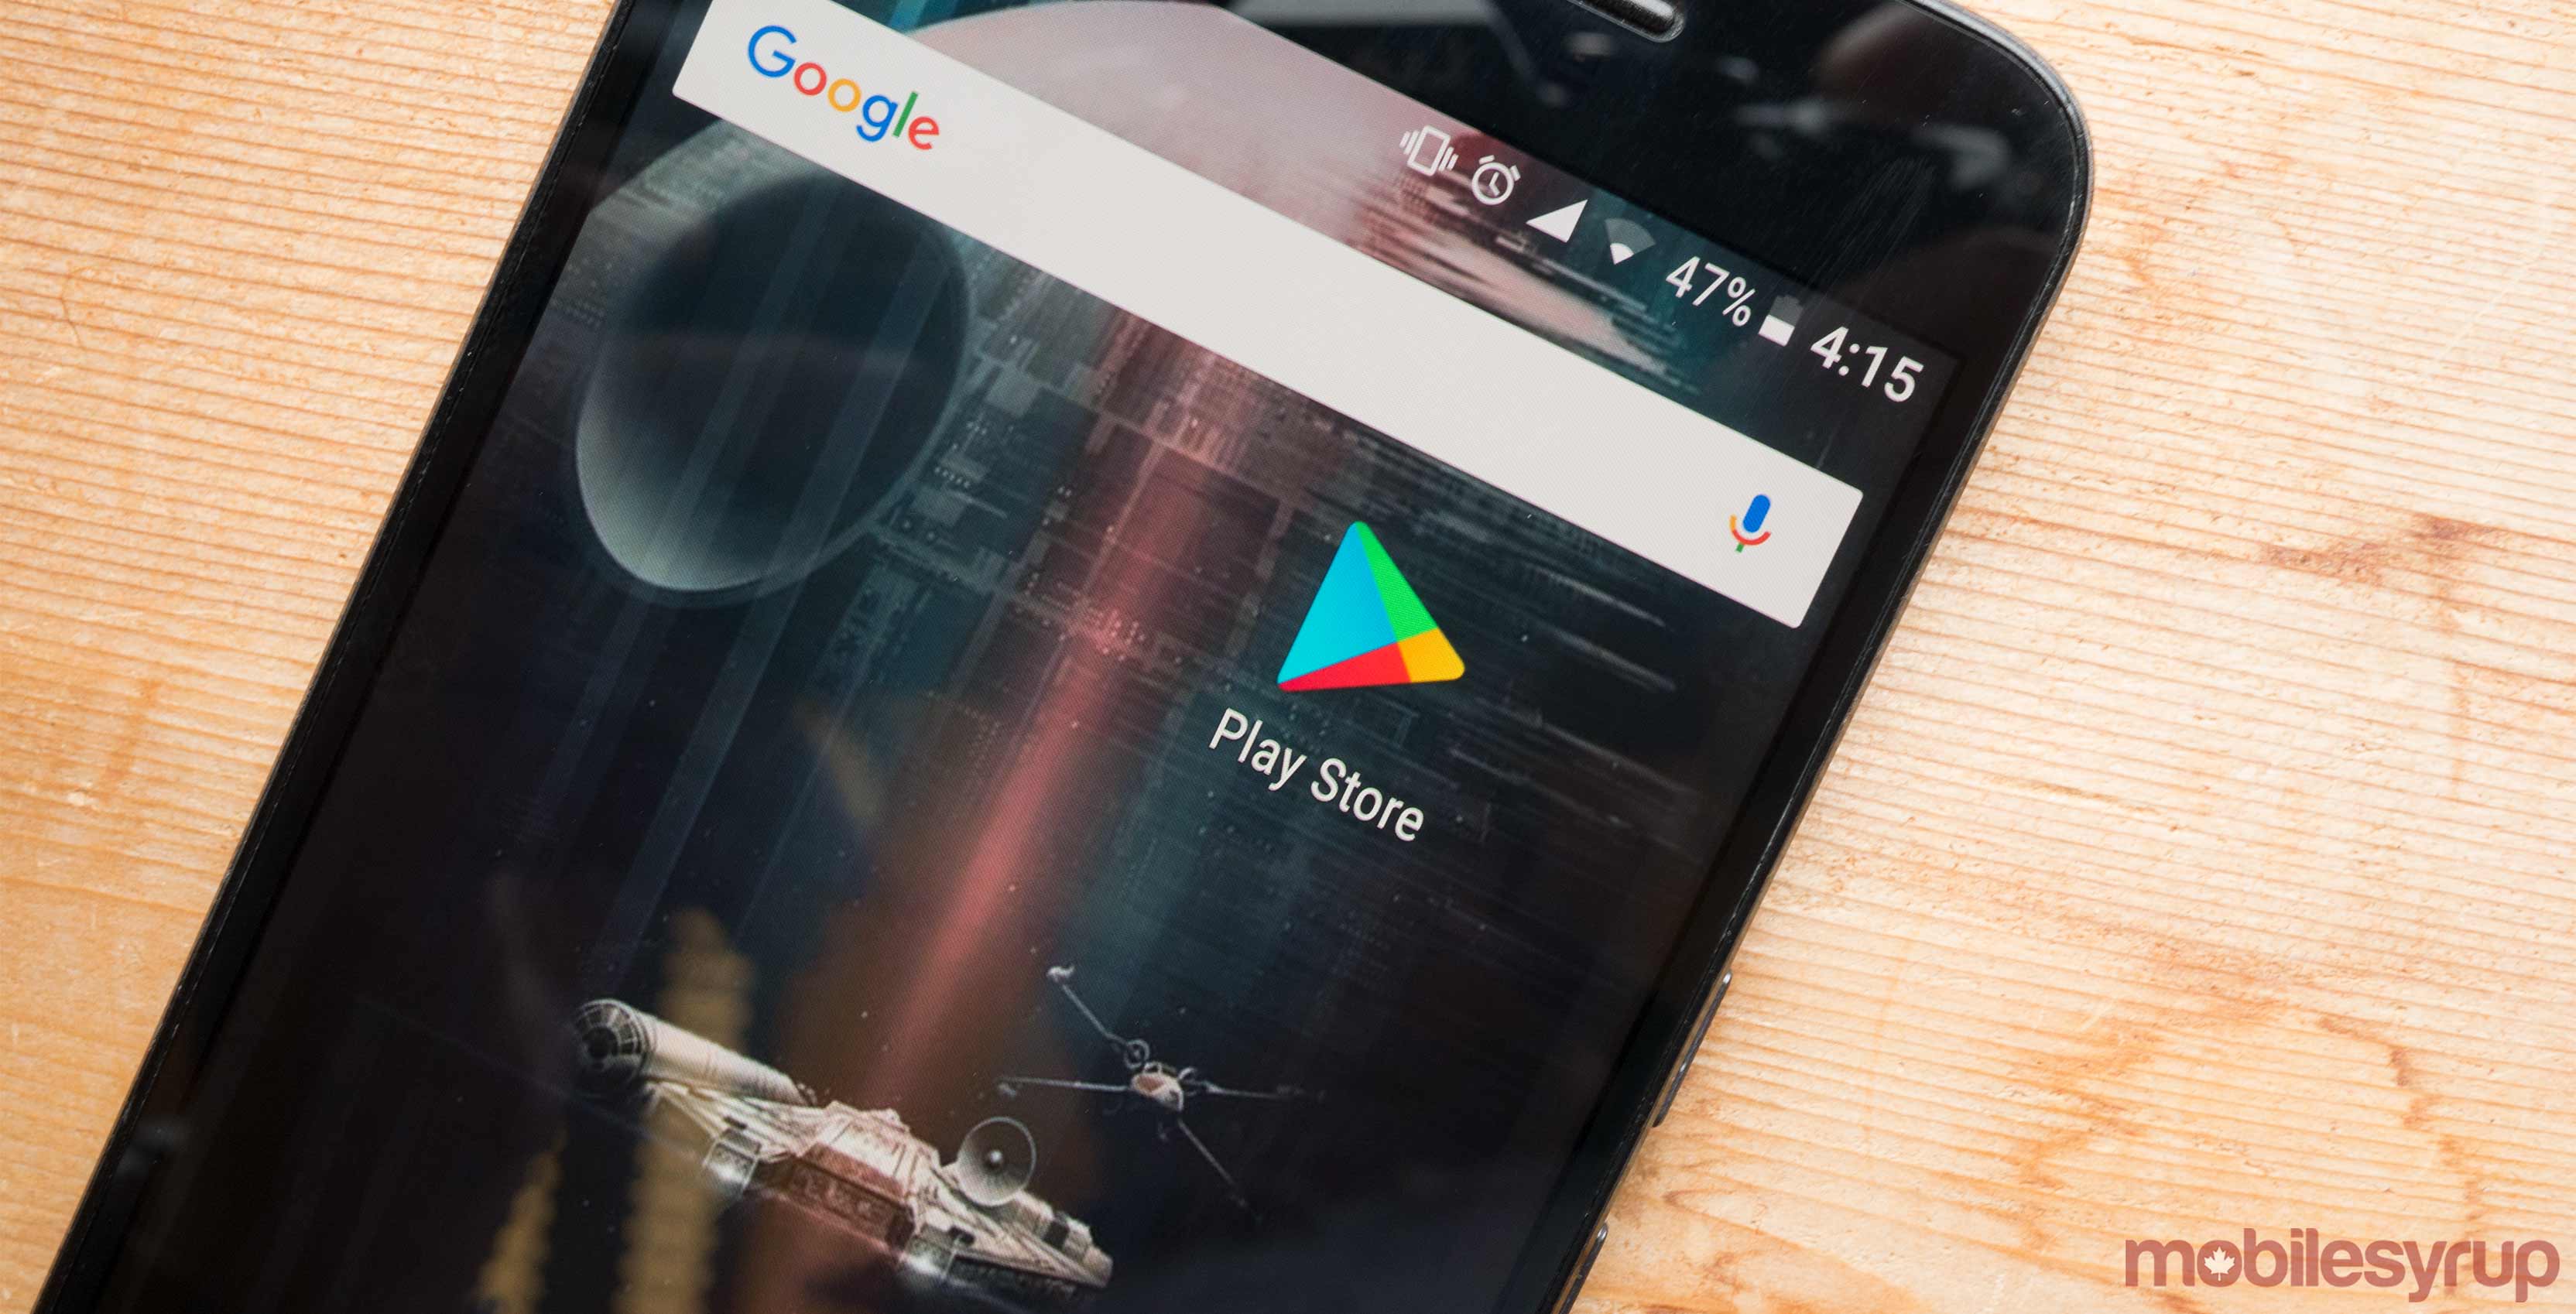 Google Play Store icon on phone